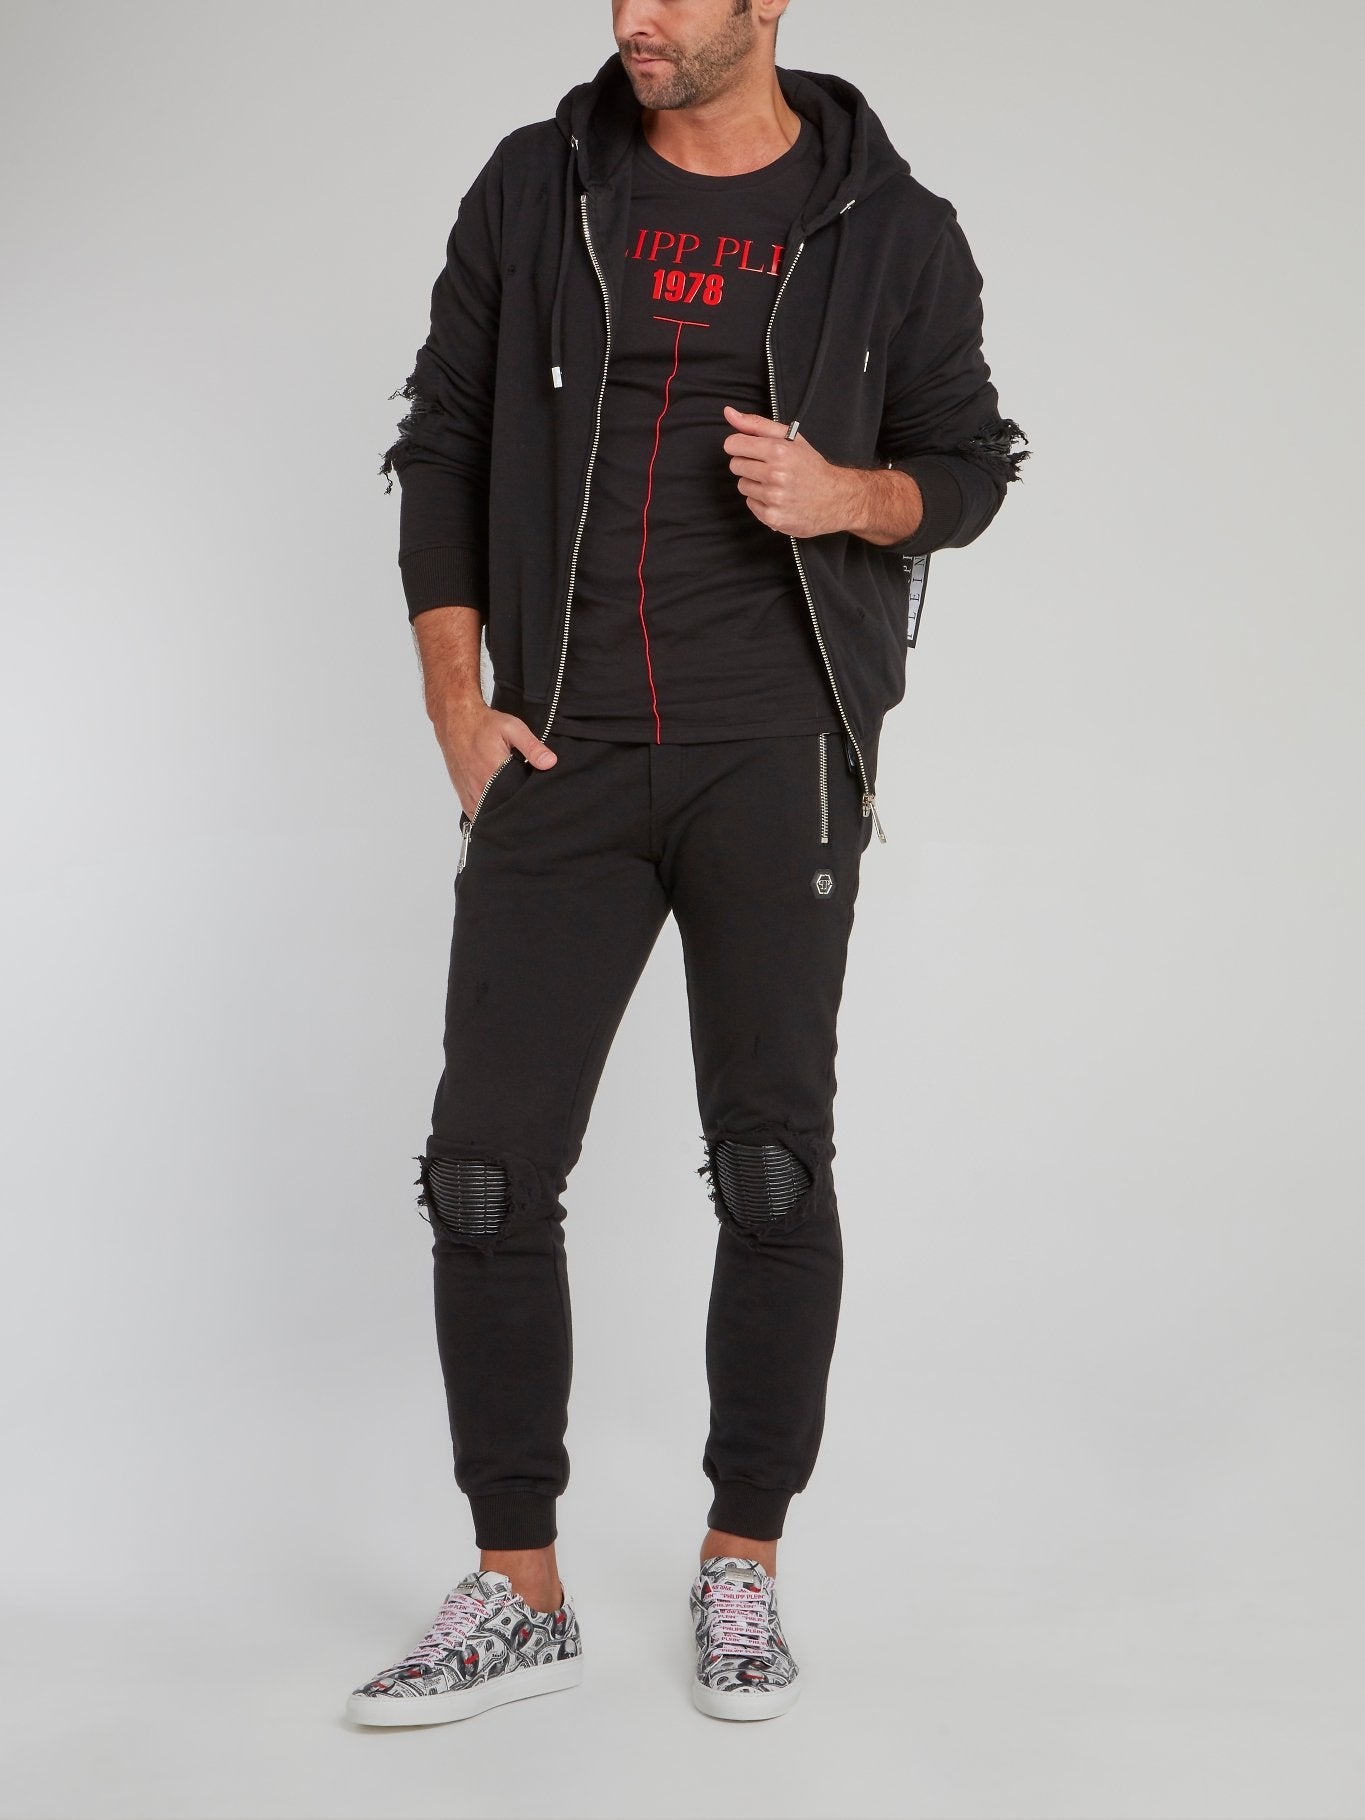 Black Distressed Jogging Trousers